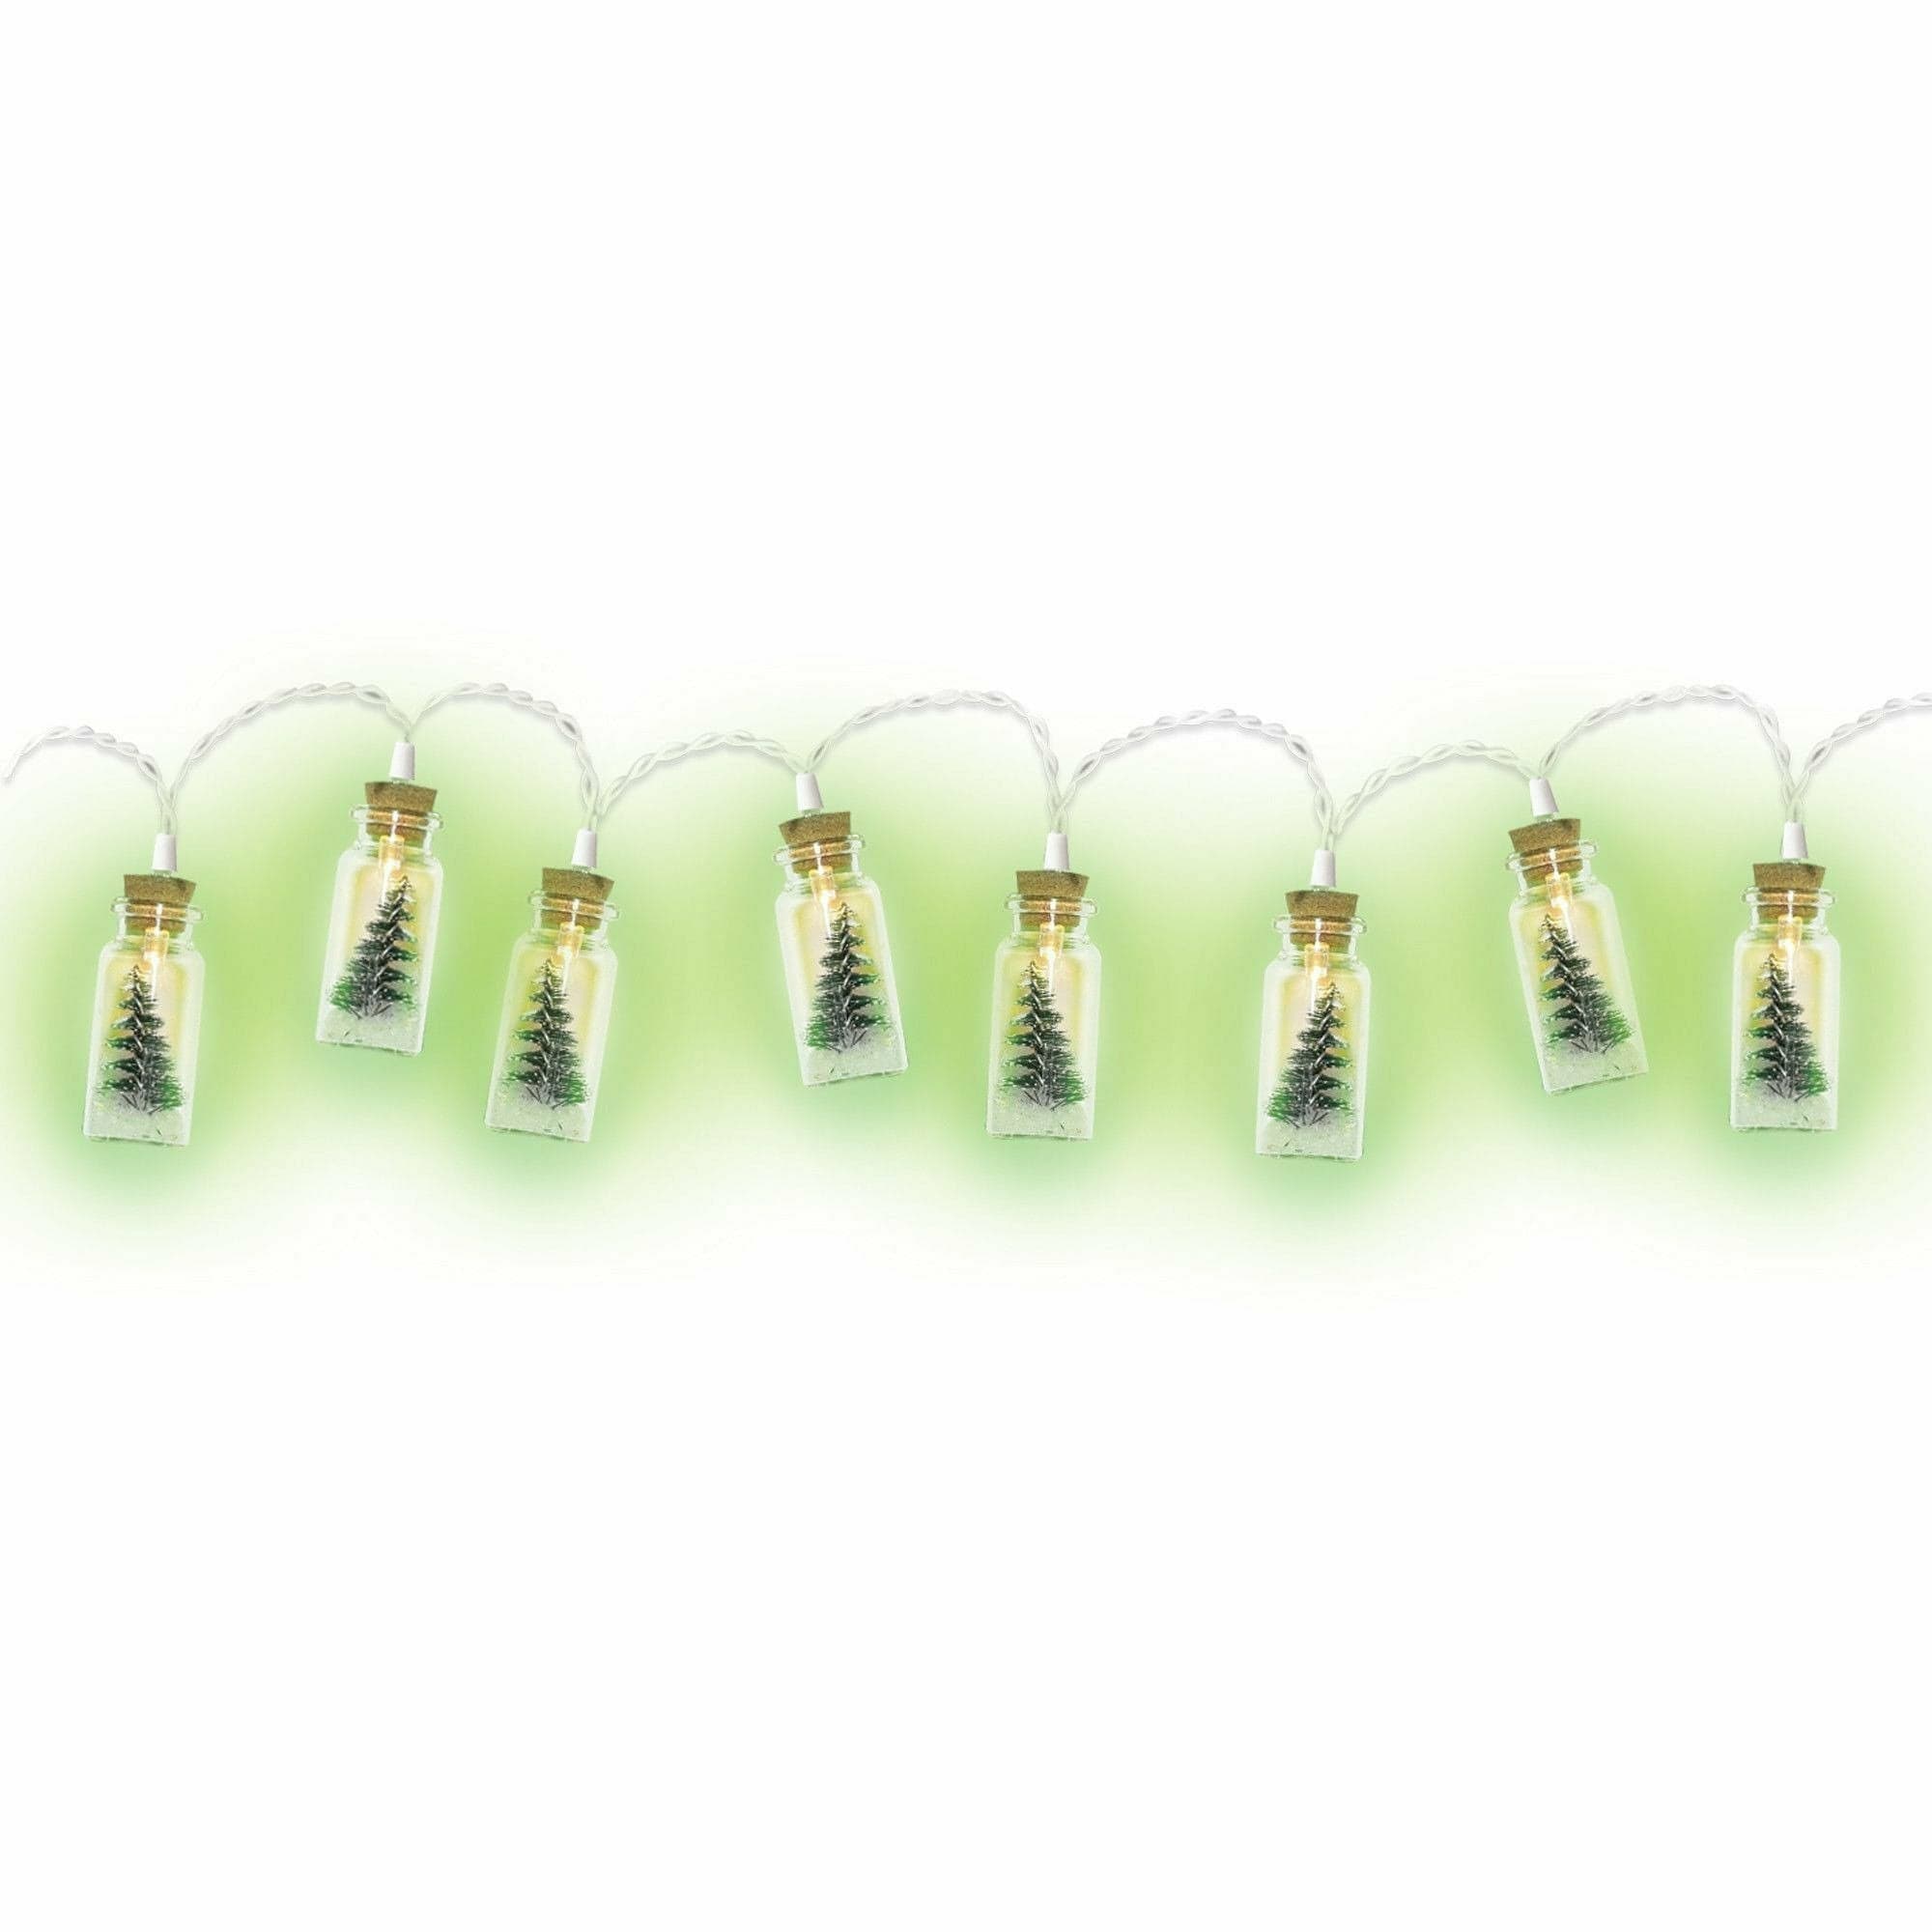 Amscan HOLIDAY: CHRISTMAS Battery Operated Tree in Glass Bottle String Lights